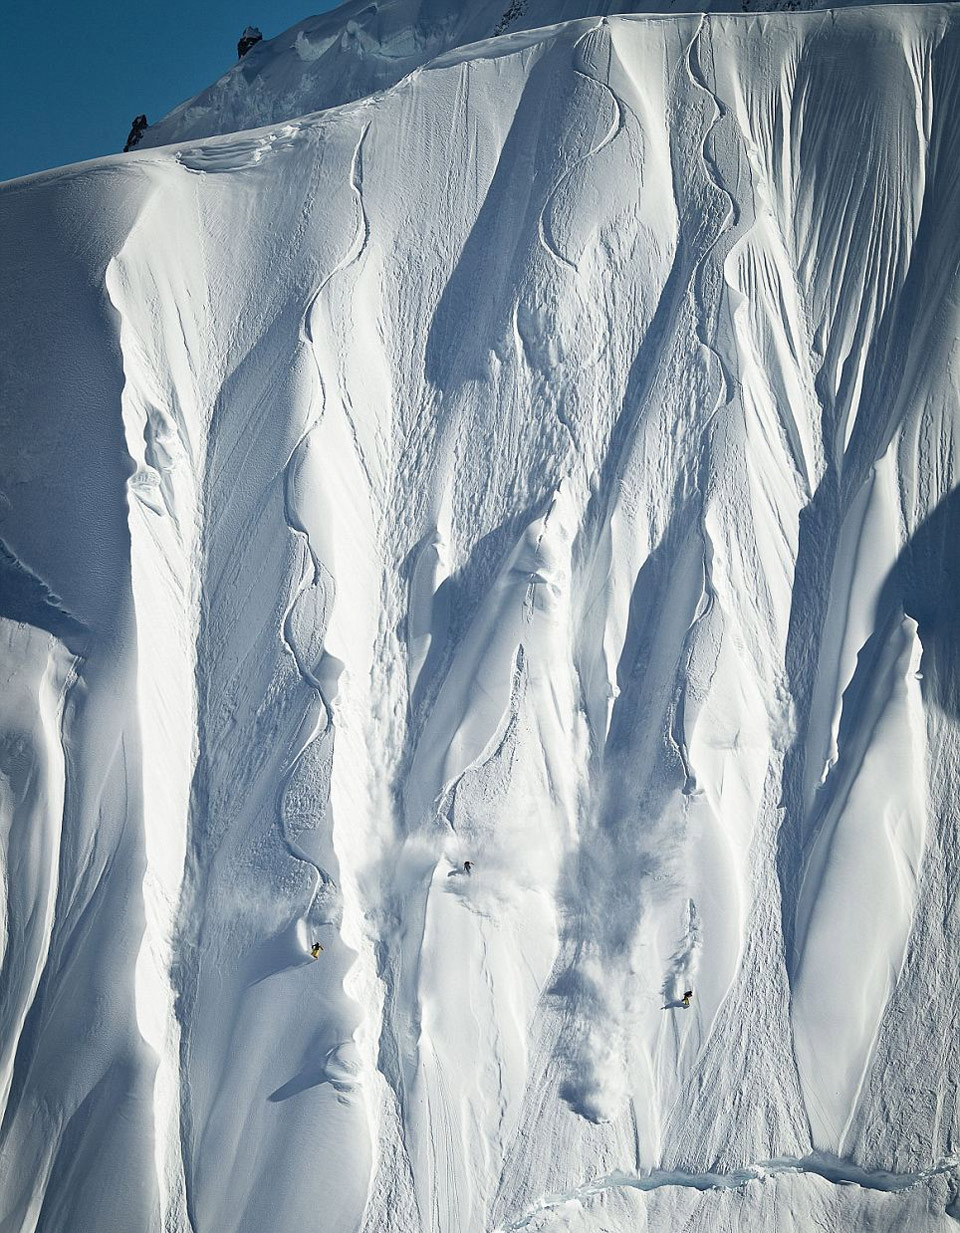 8first-snowboarders-to-conquer-vertical-alaskan-slope